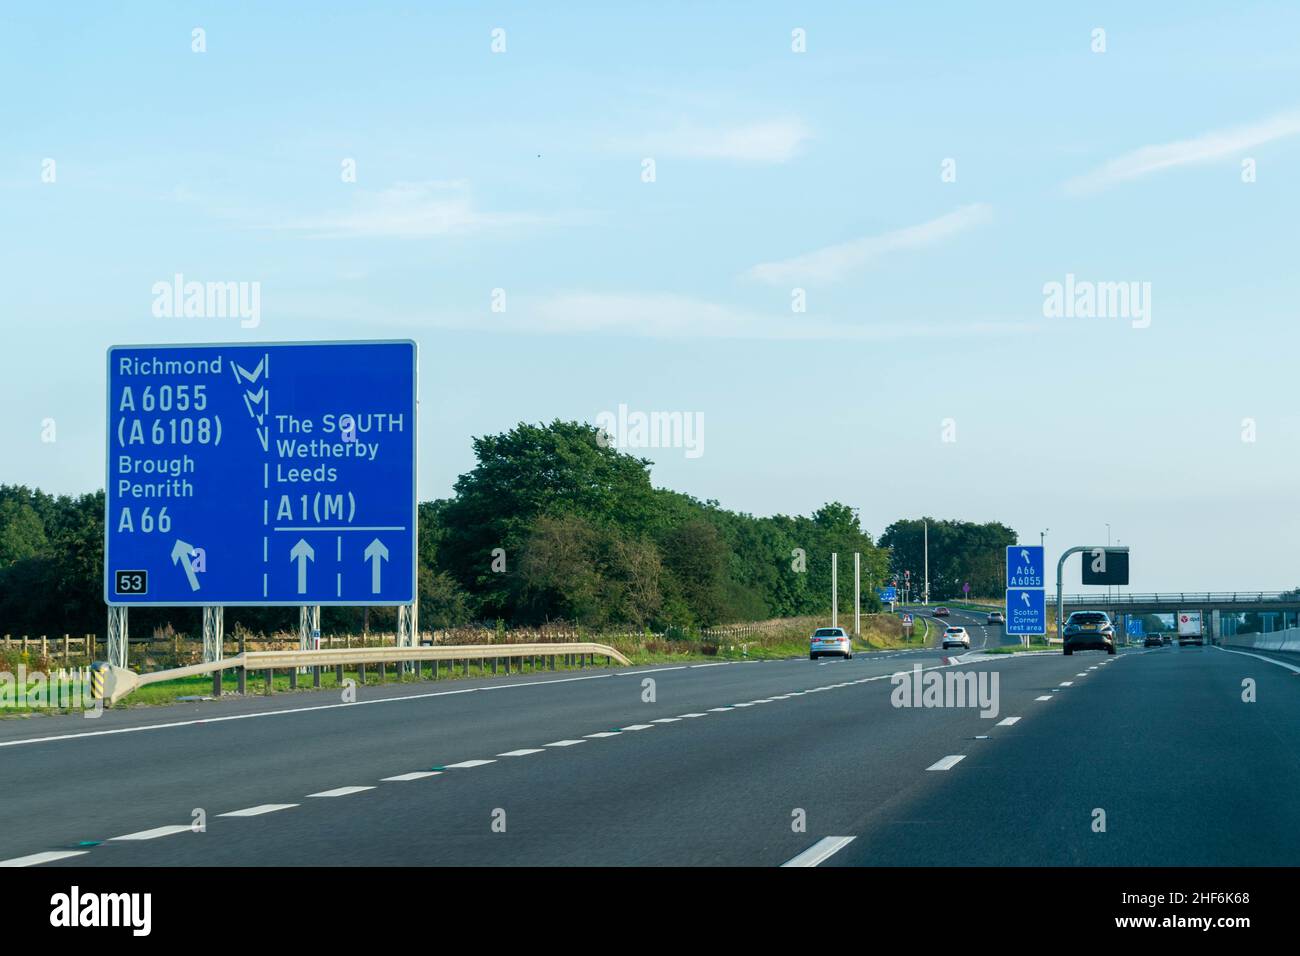 Leeds, UK - 23rd August 2019: Cars drive down the A1 British motorway with blue highway signs directing drivers to Richmond, Leeds, Brough, Wetherby, Stock Photo